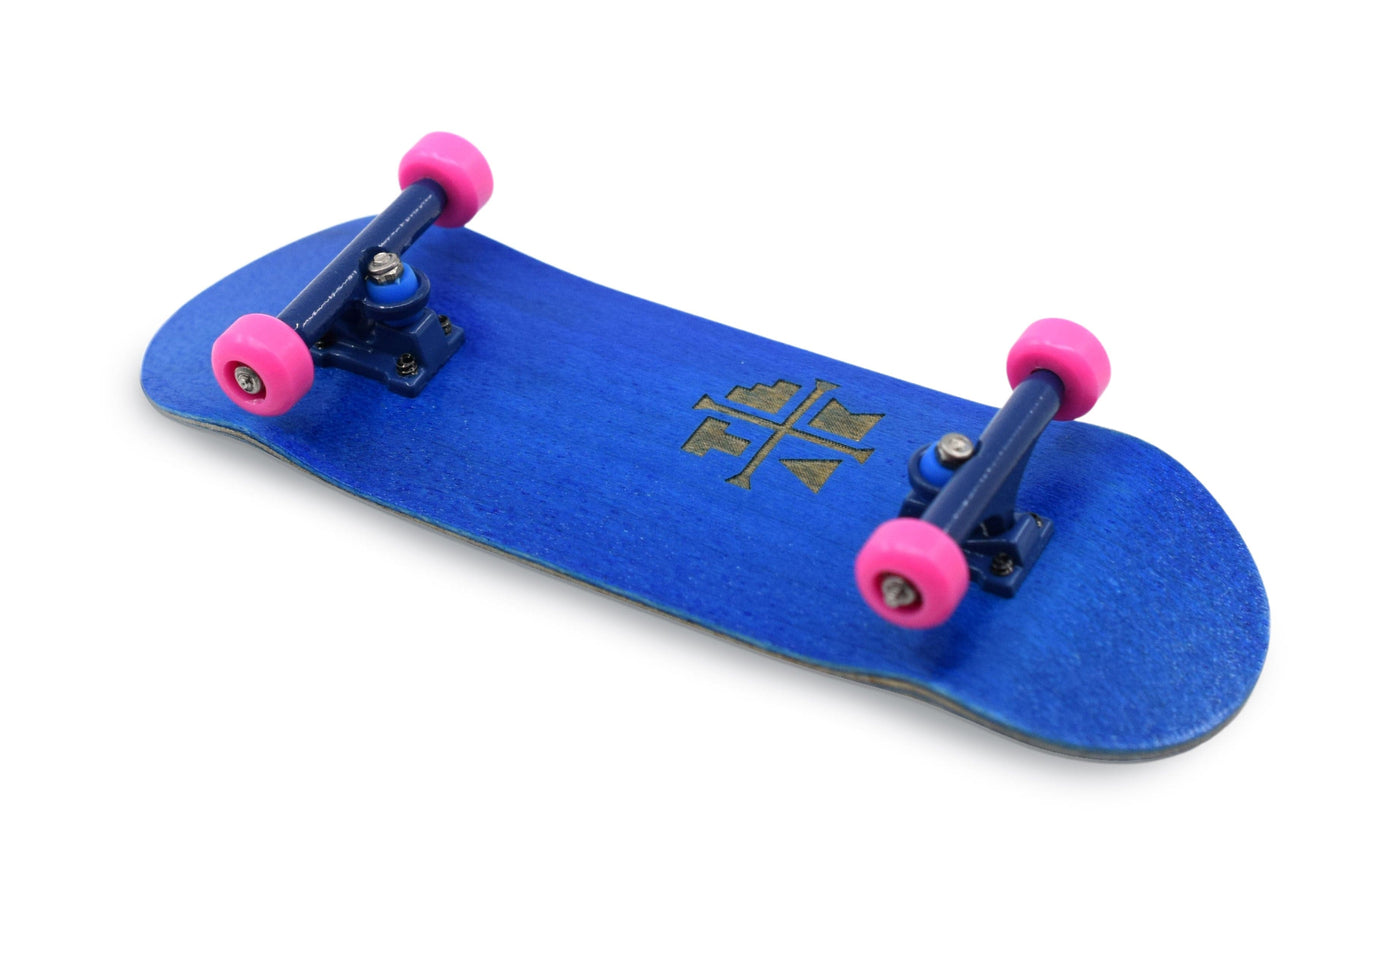 Teak Tuning PROlific Complete with Prodigy Trucks - "Blue & Pink" Edition